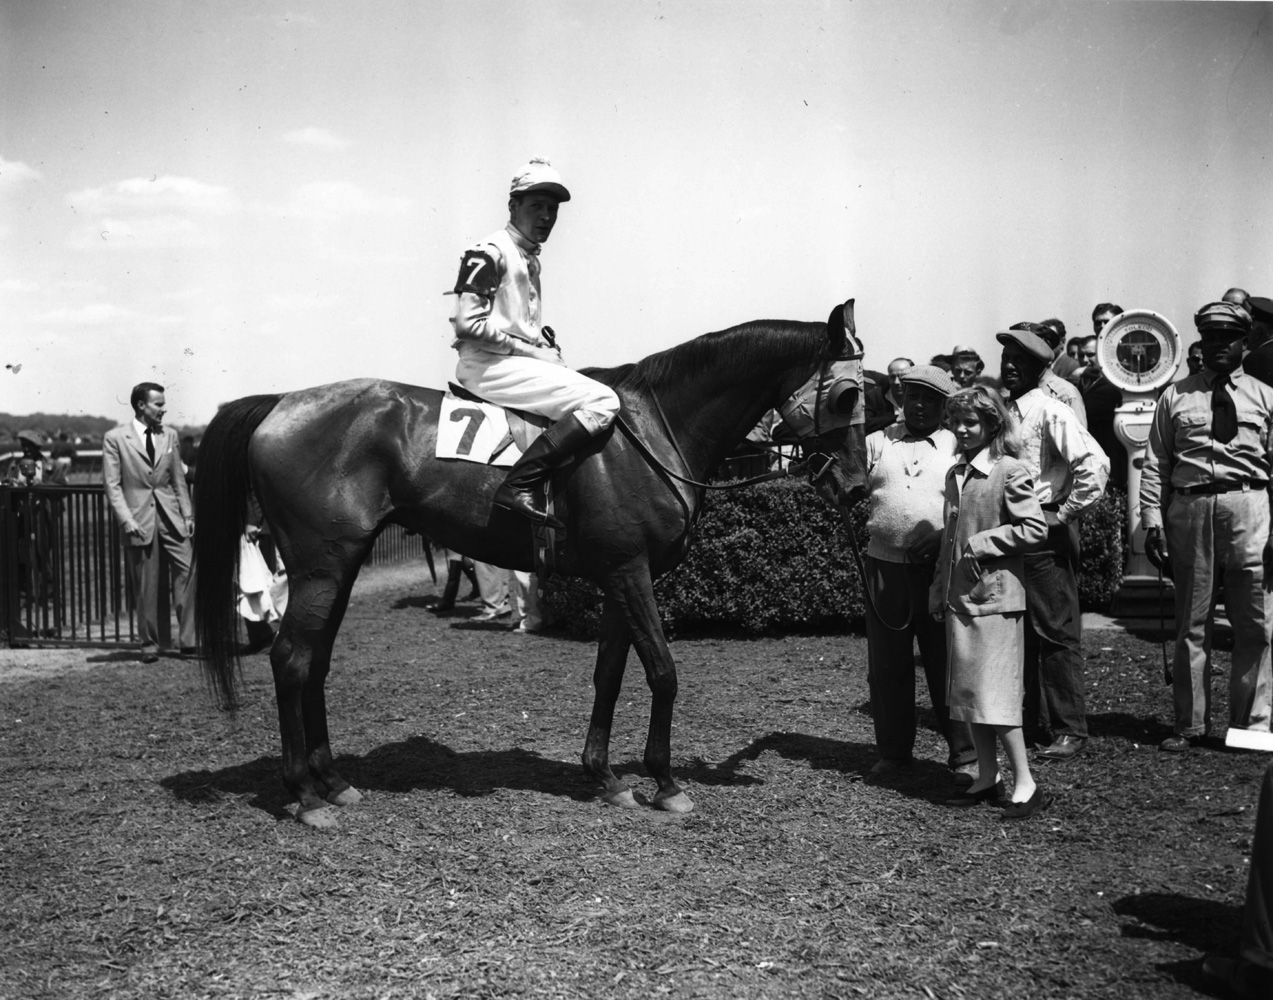 Elkridge (P. Smithwick up) in the winner's circle for the 1949 Meadow Brook Handicap Steeplechase at Belmont Park (Keeneland Library Morgan Collection/Museum Collection)